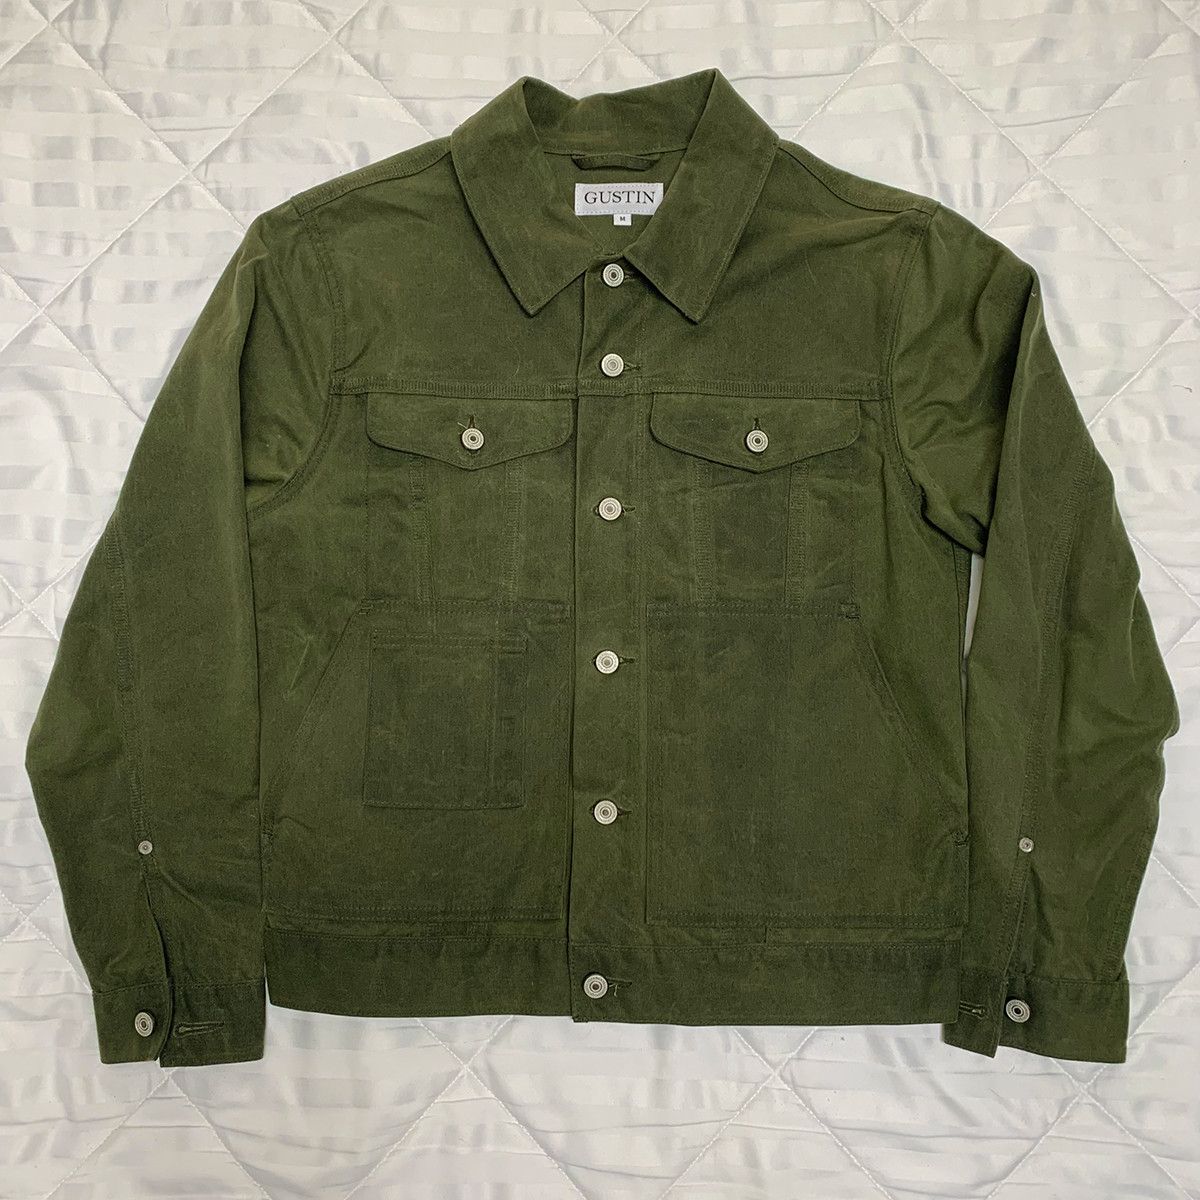 Gustin Gustin Olive Waxed Cotton Trucker Jacket Size US M / EU 48-50 / 2 - 1 Preview